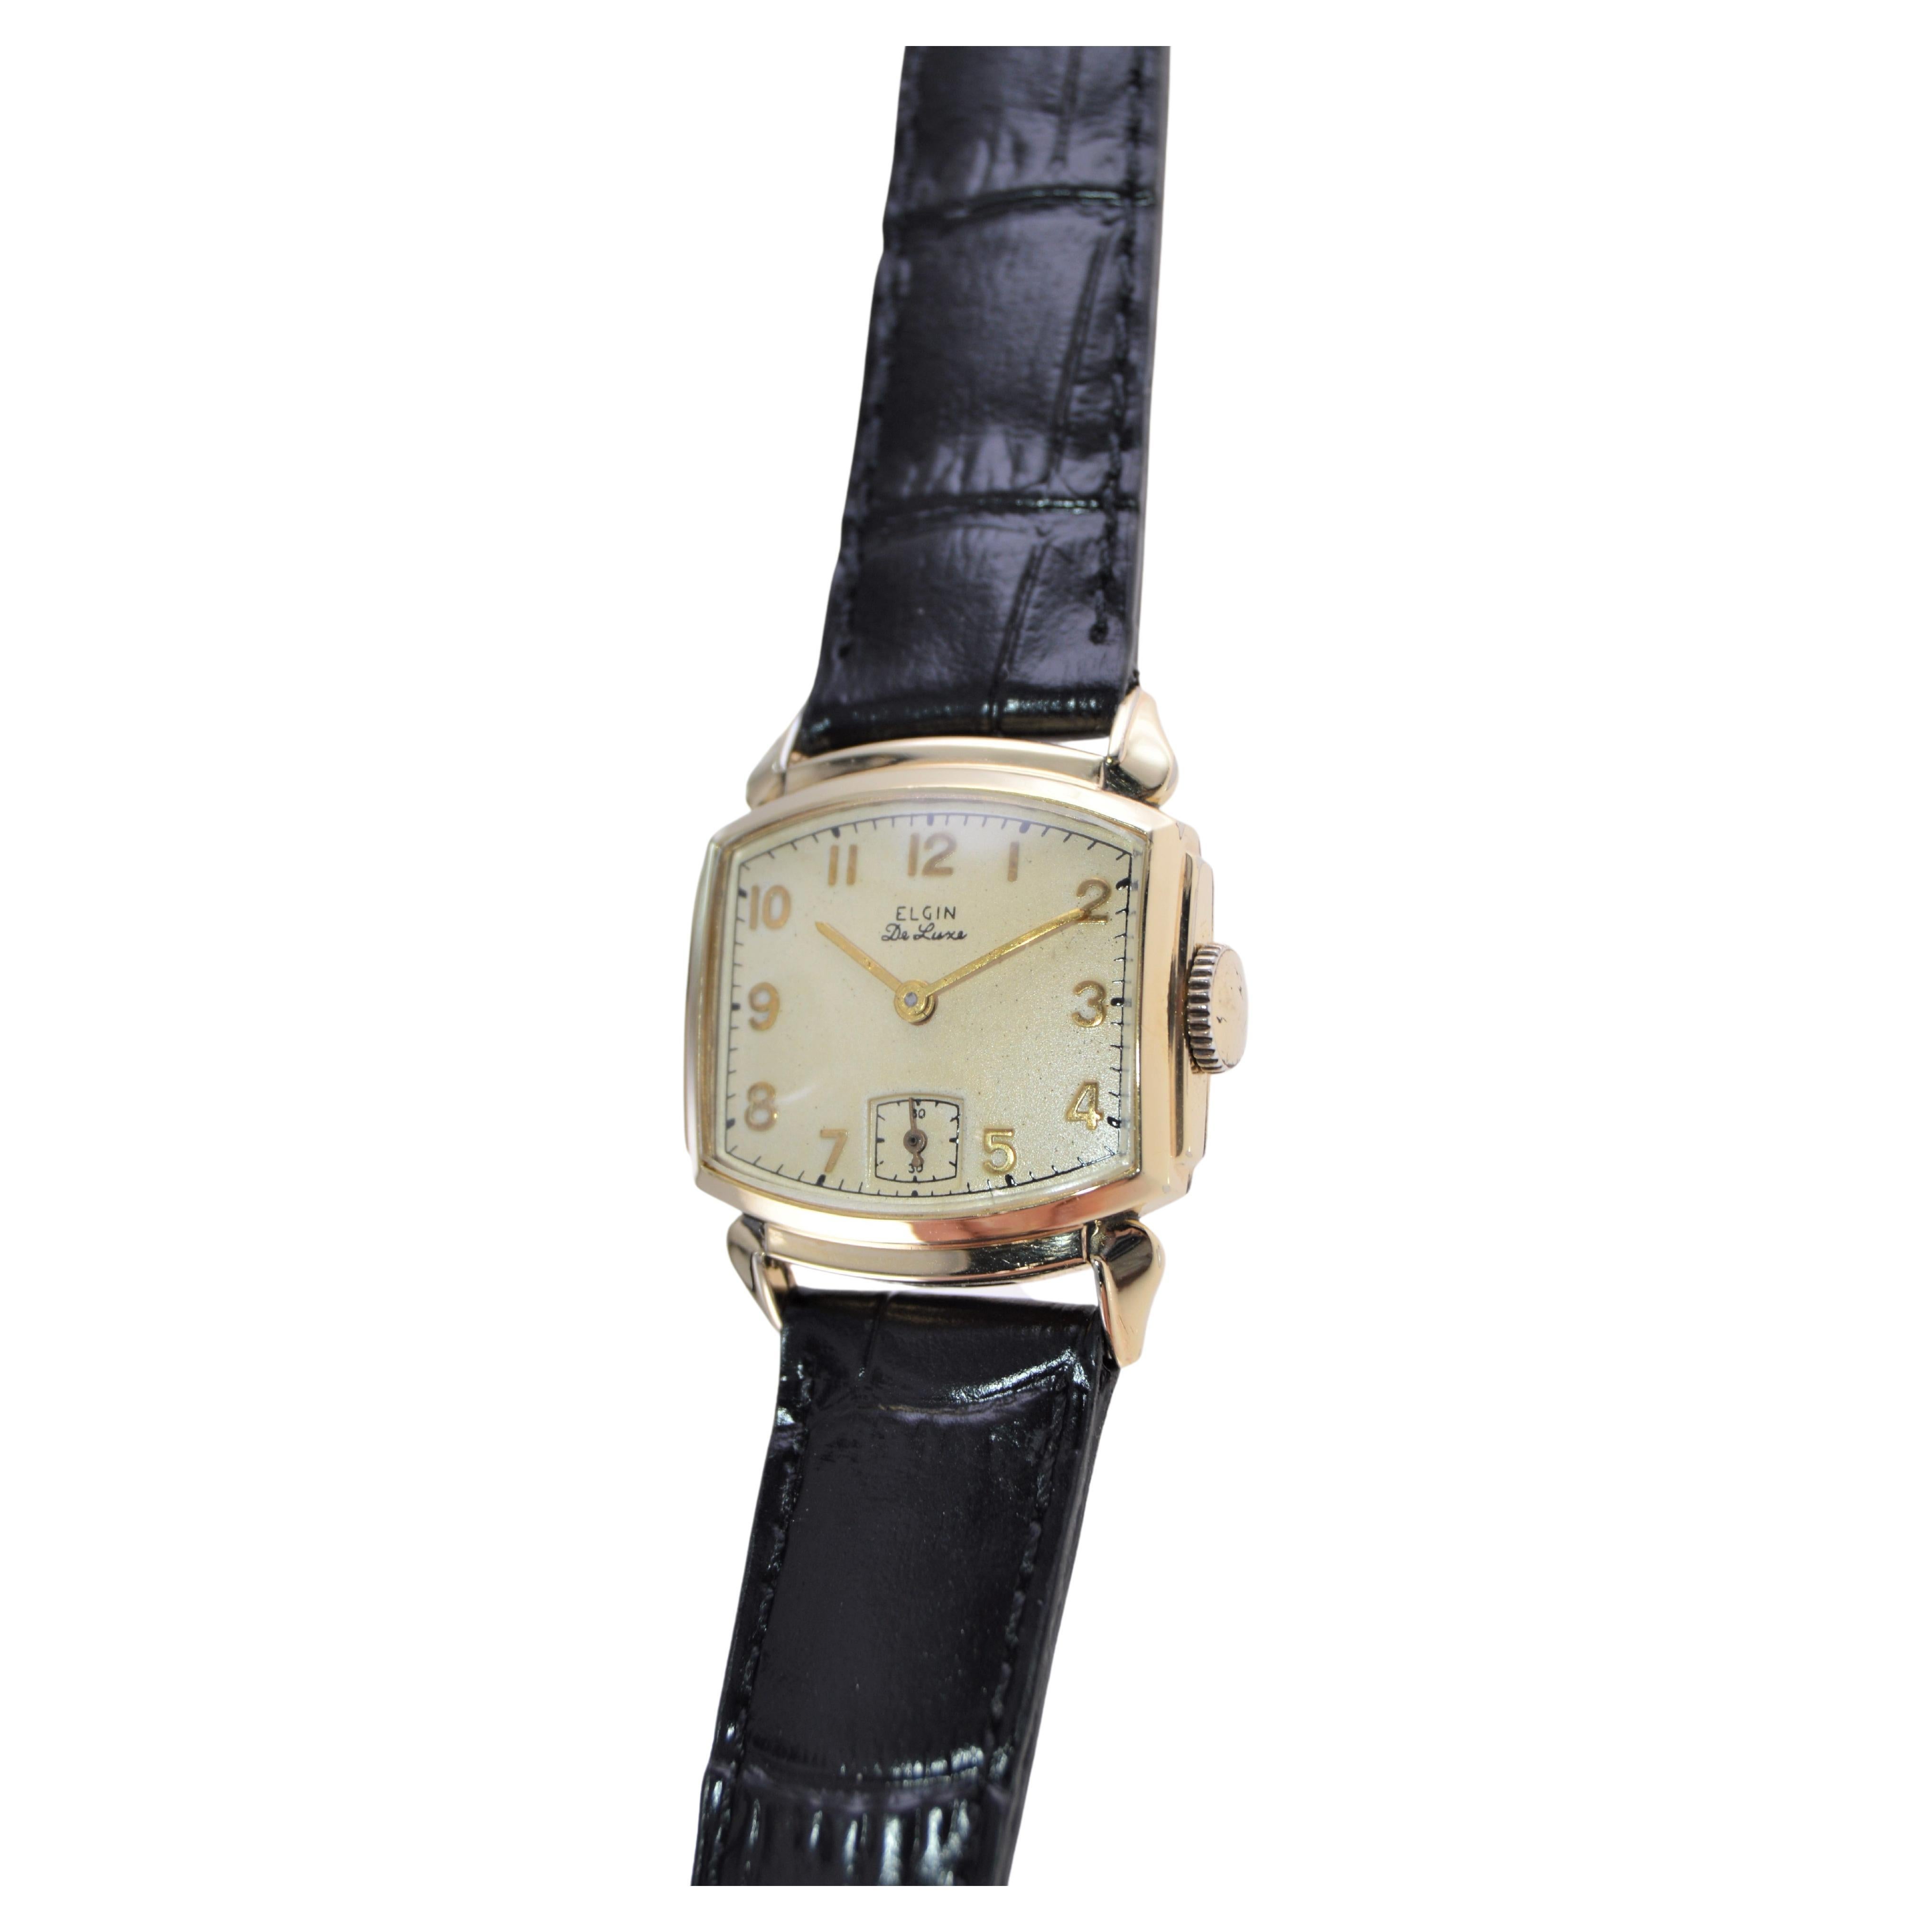 Elgin Gold Filled Art Deco Watch with Original Dial from 1940's For Sale 1